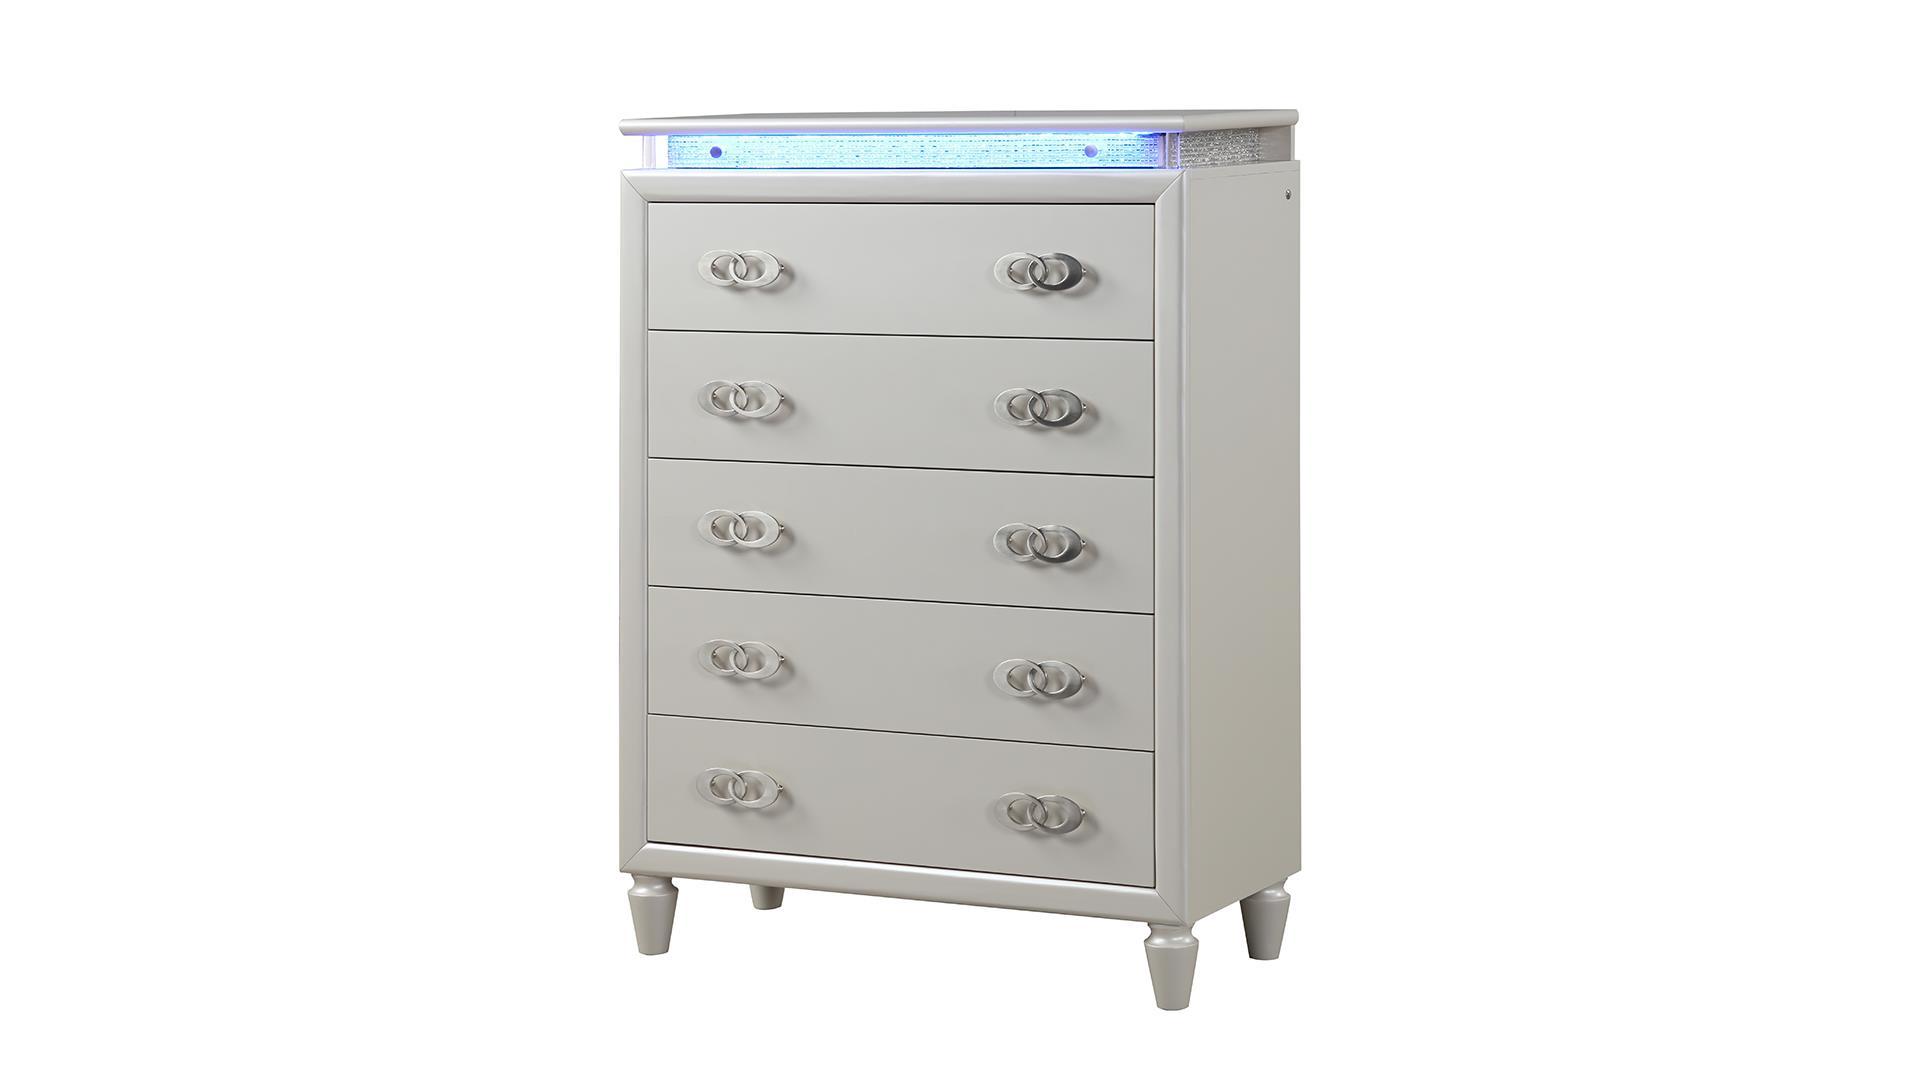 

    
Milky White Led 6 Drawer Chest PASSION Galaxy Home Contemporary Modern
